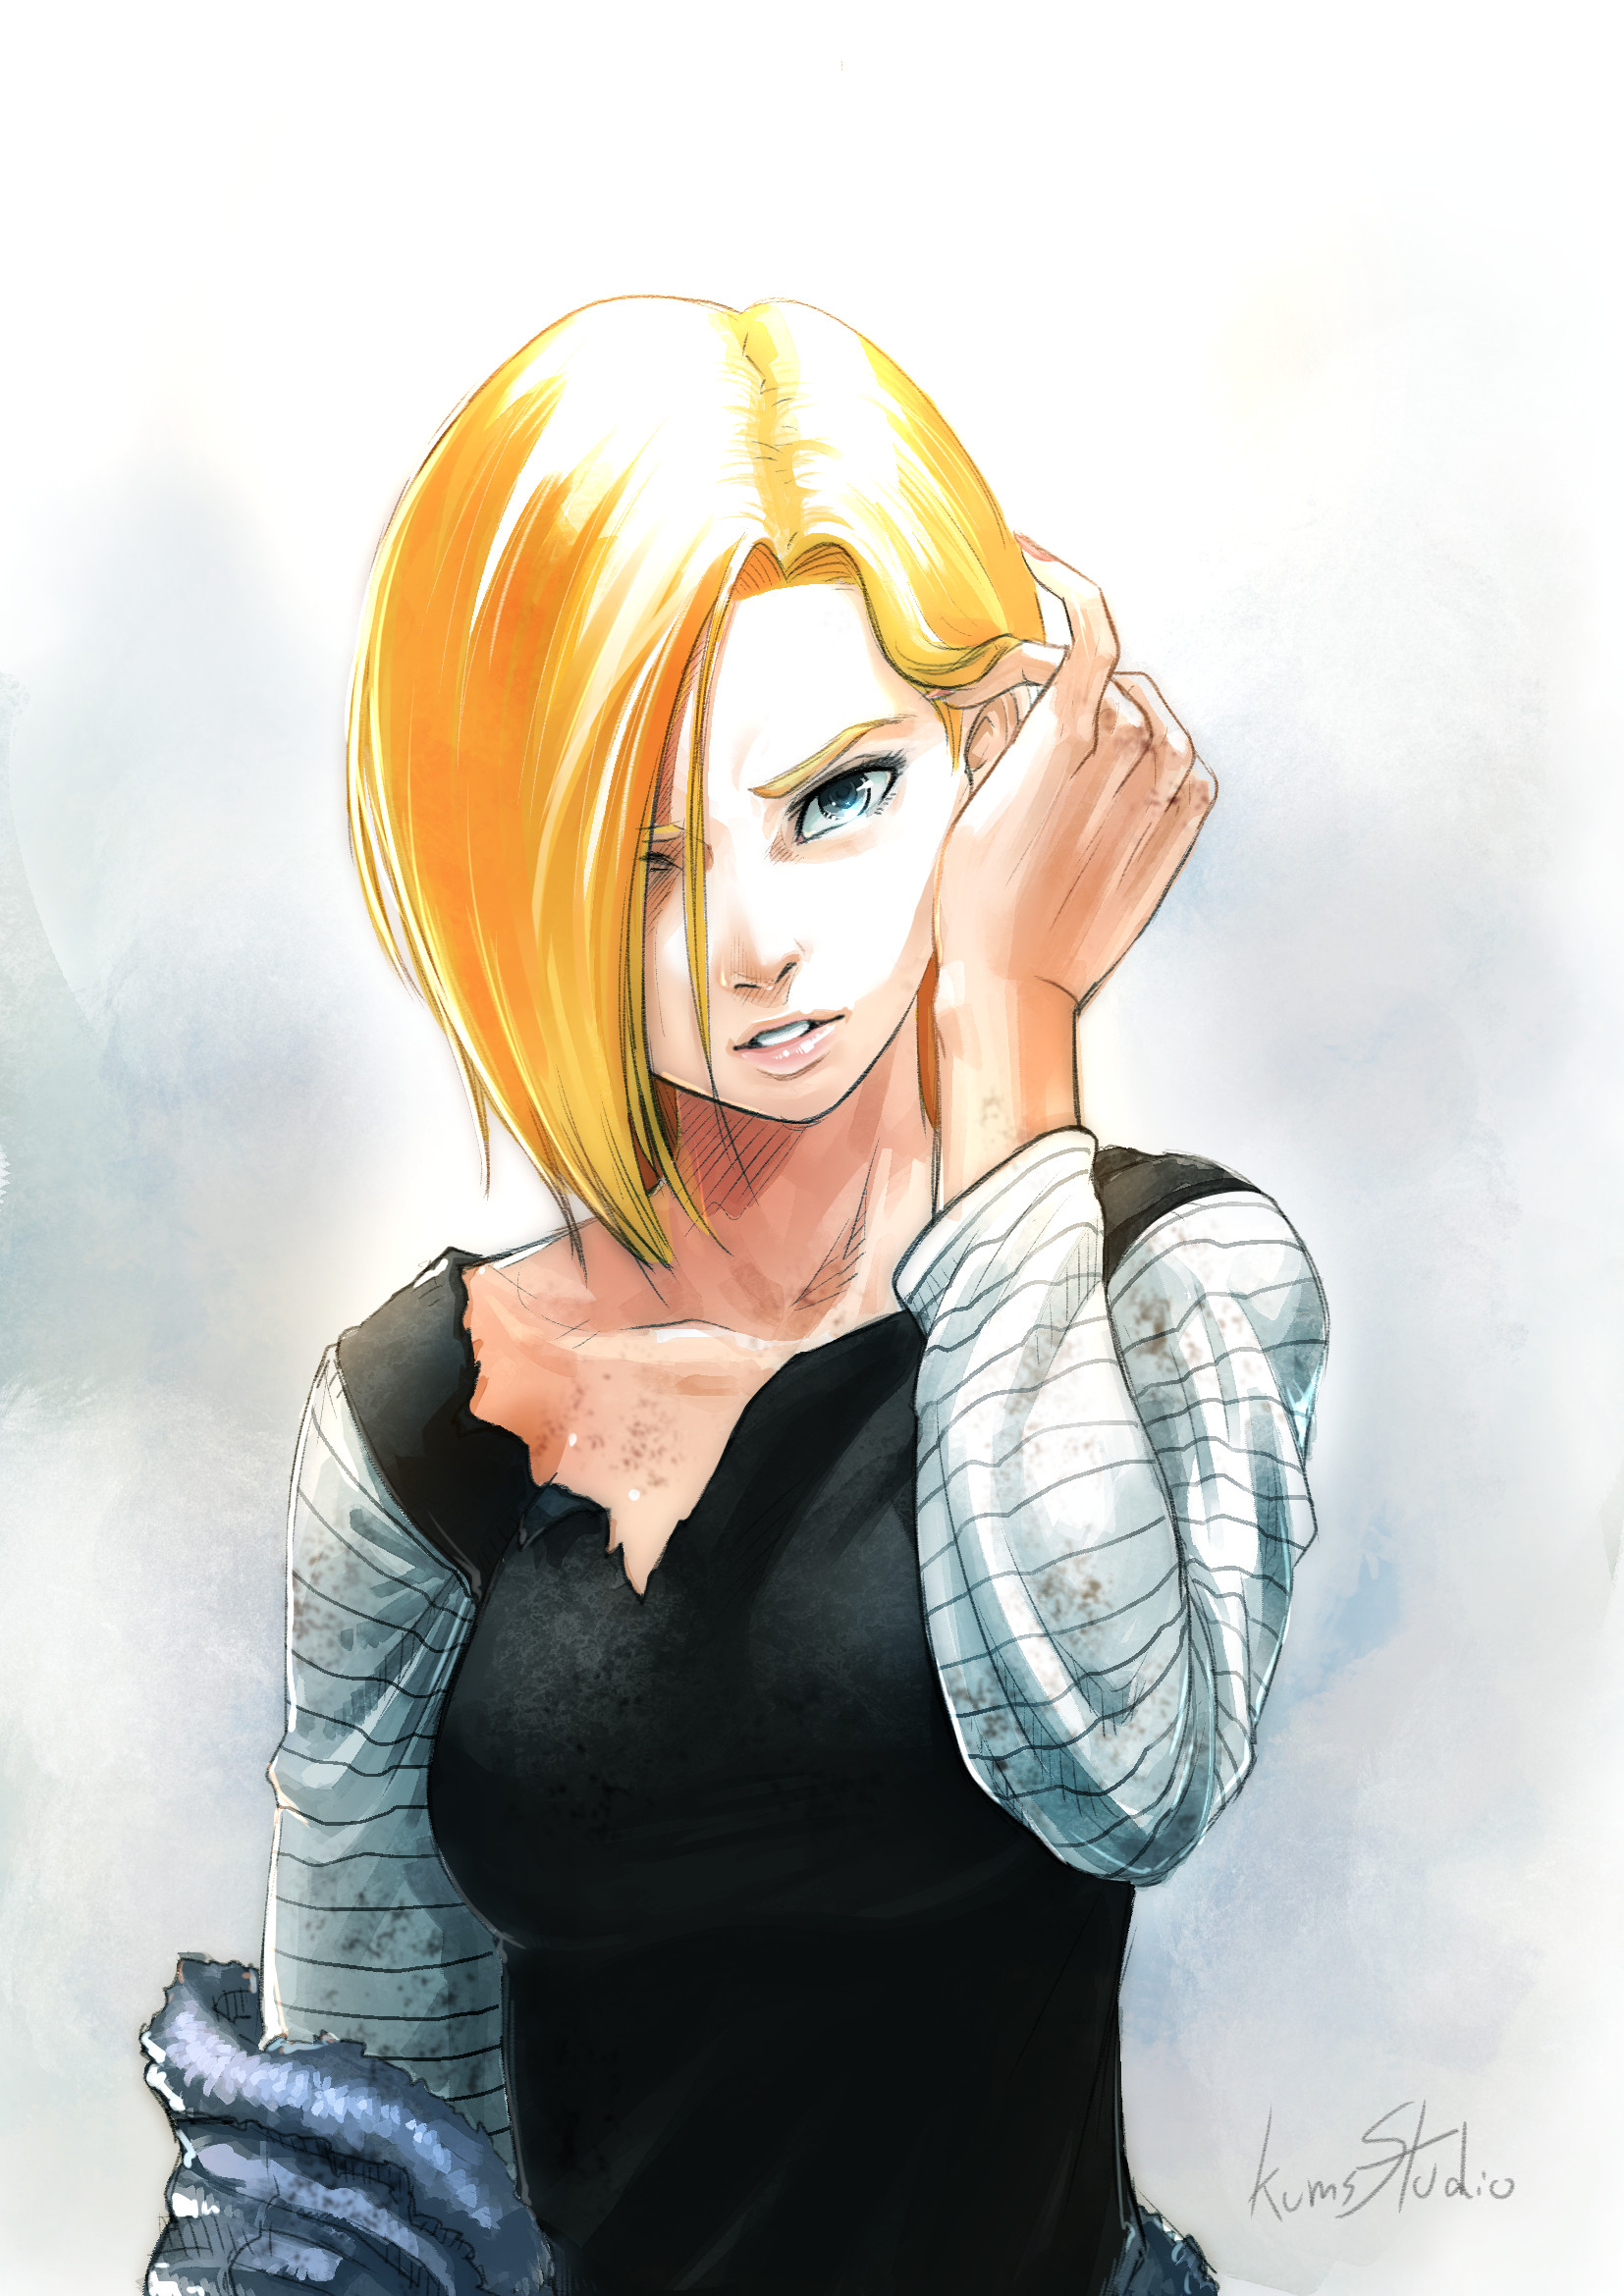 1654x2339 View Fullsize Android 18 Image